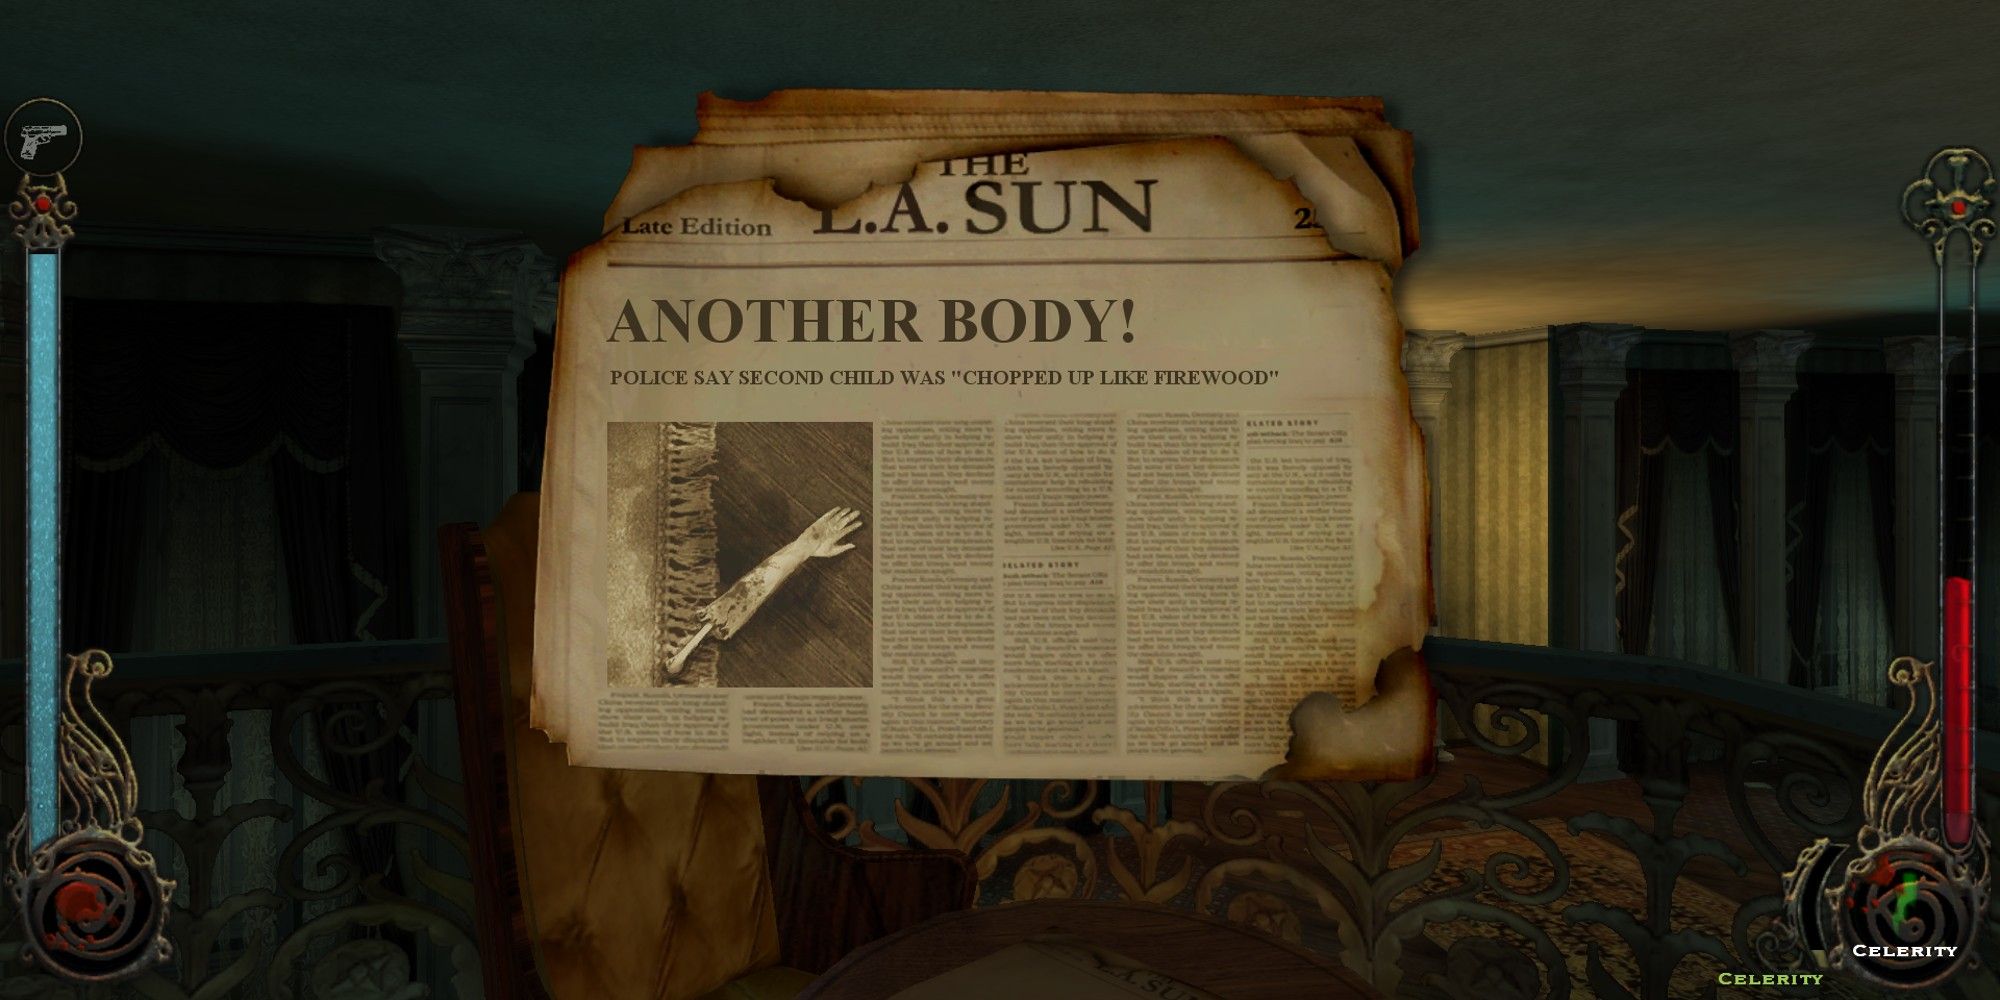 Newspaper with the headline "Another Body!" in Vampire: The Masquerade - Bloodlines